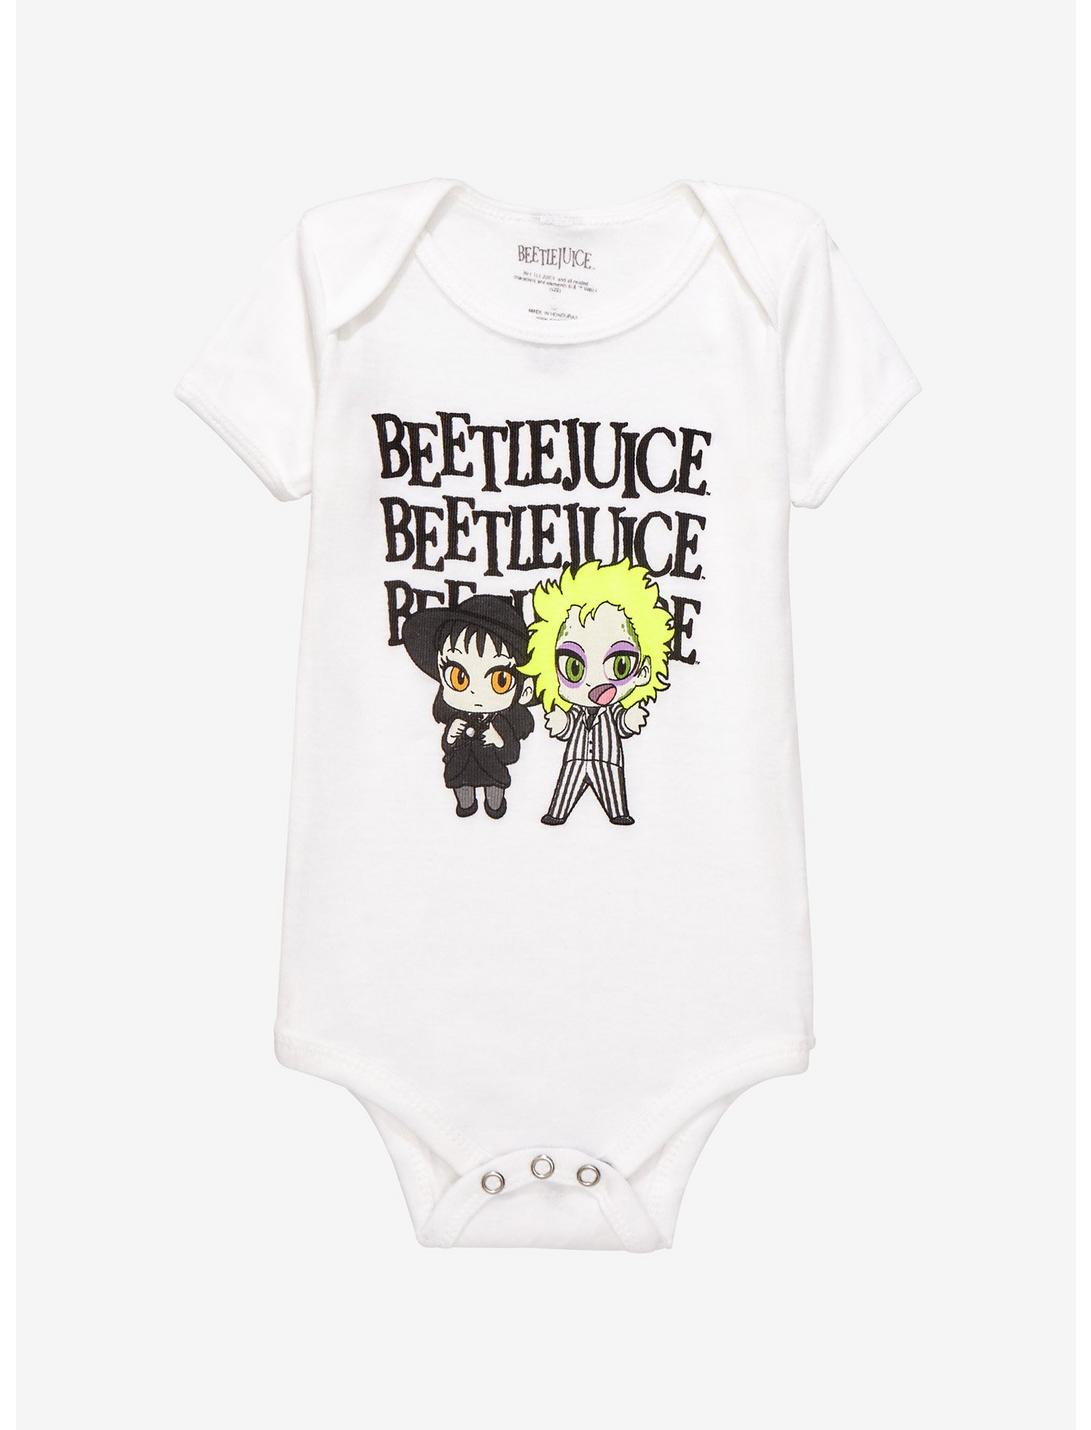 Beetlejuice Chibi Lydia & Beetlejuice Portrait Infant One-Piece - BoxLunch Exclusive , OFF WHITE, hi-res